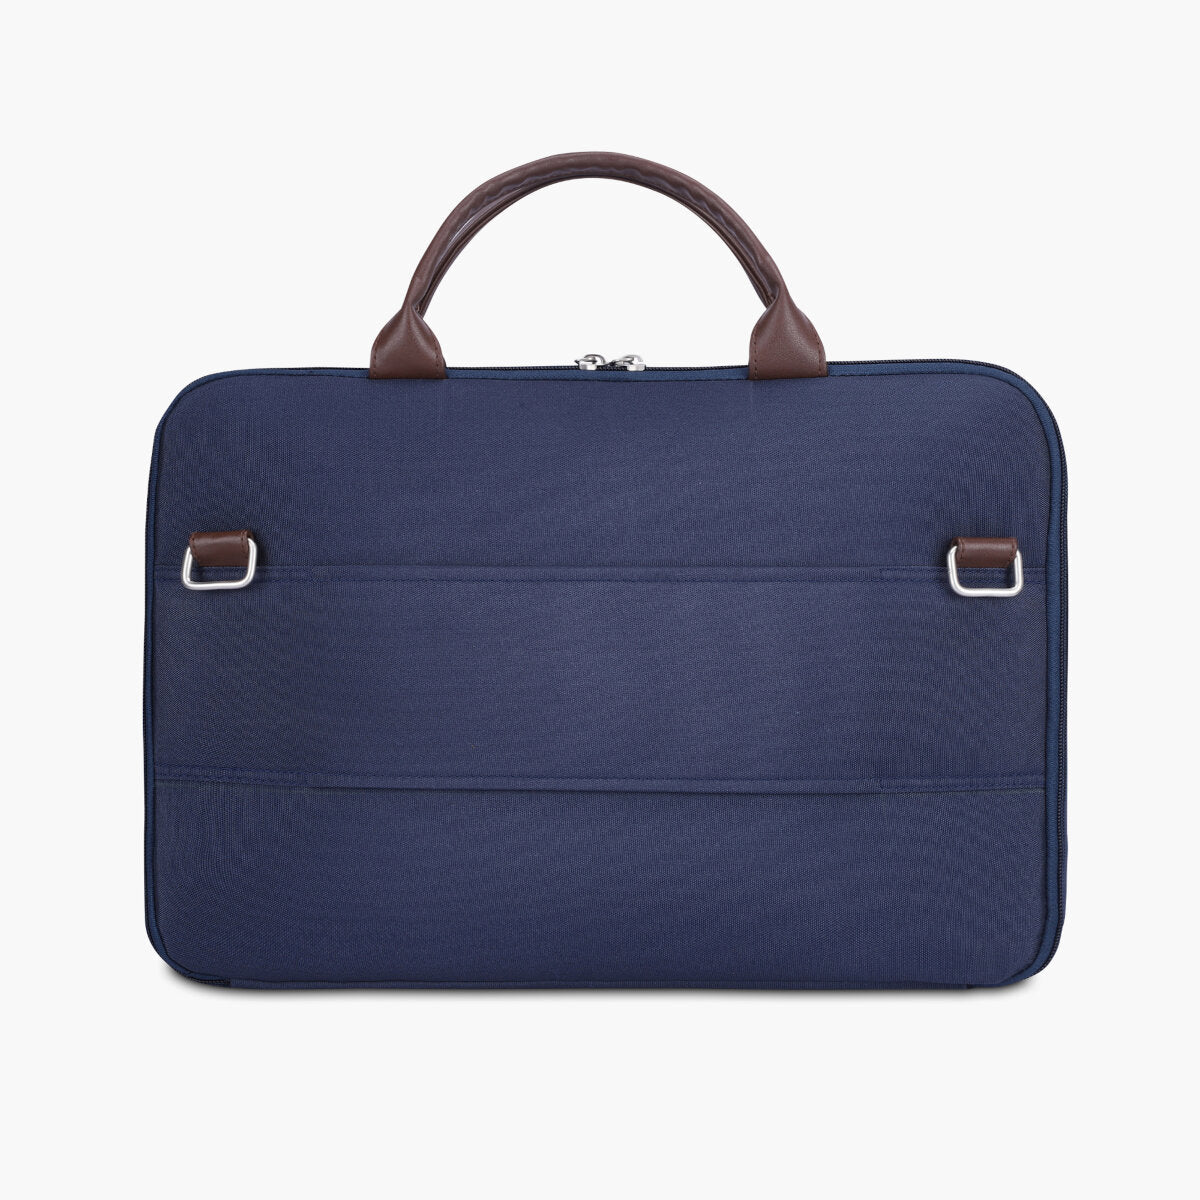 Blue | Protecta Quest Anti-Theft Office Laptop Bag - 6